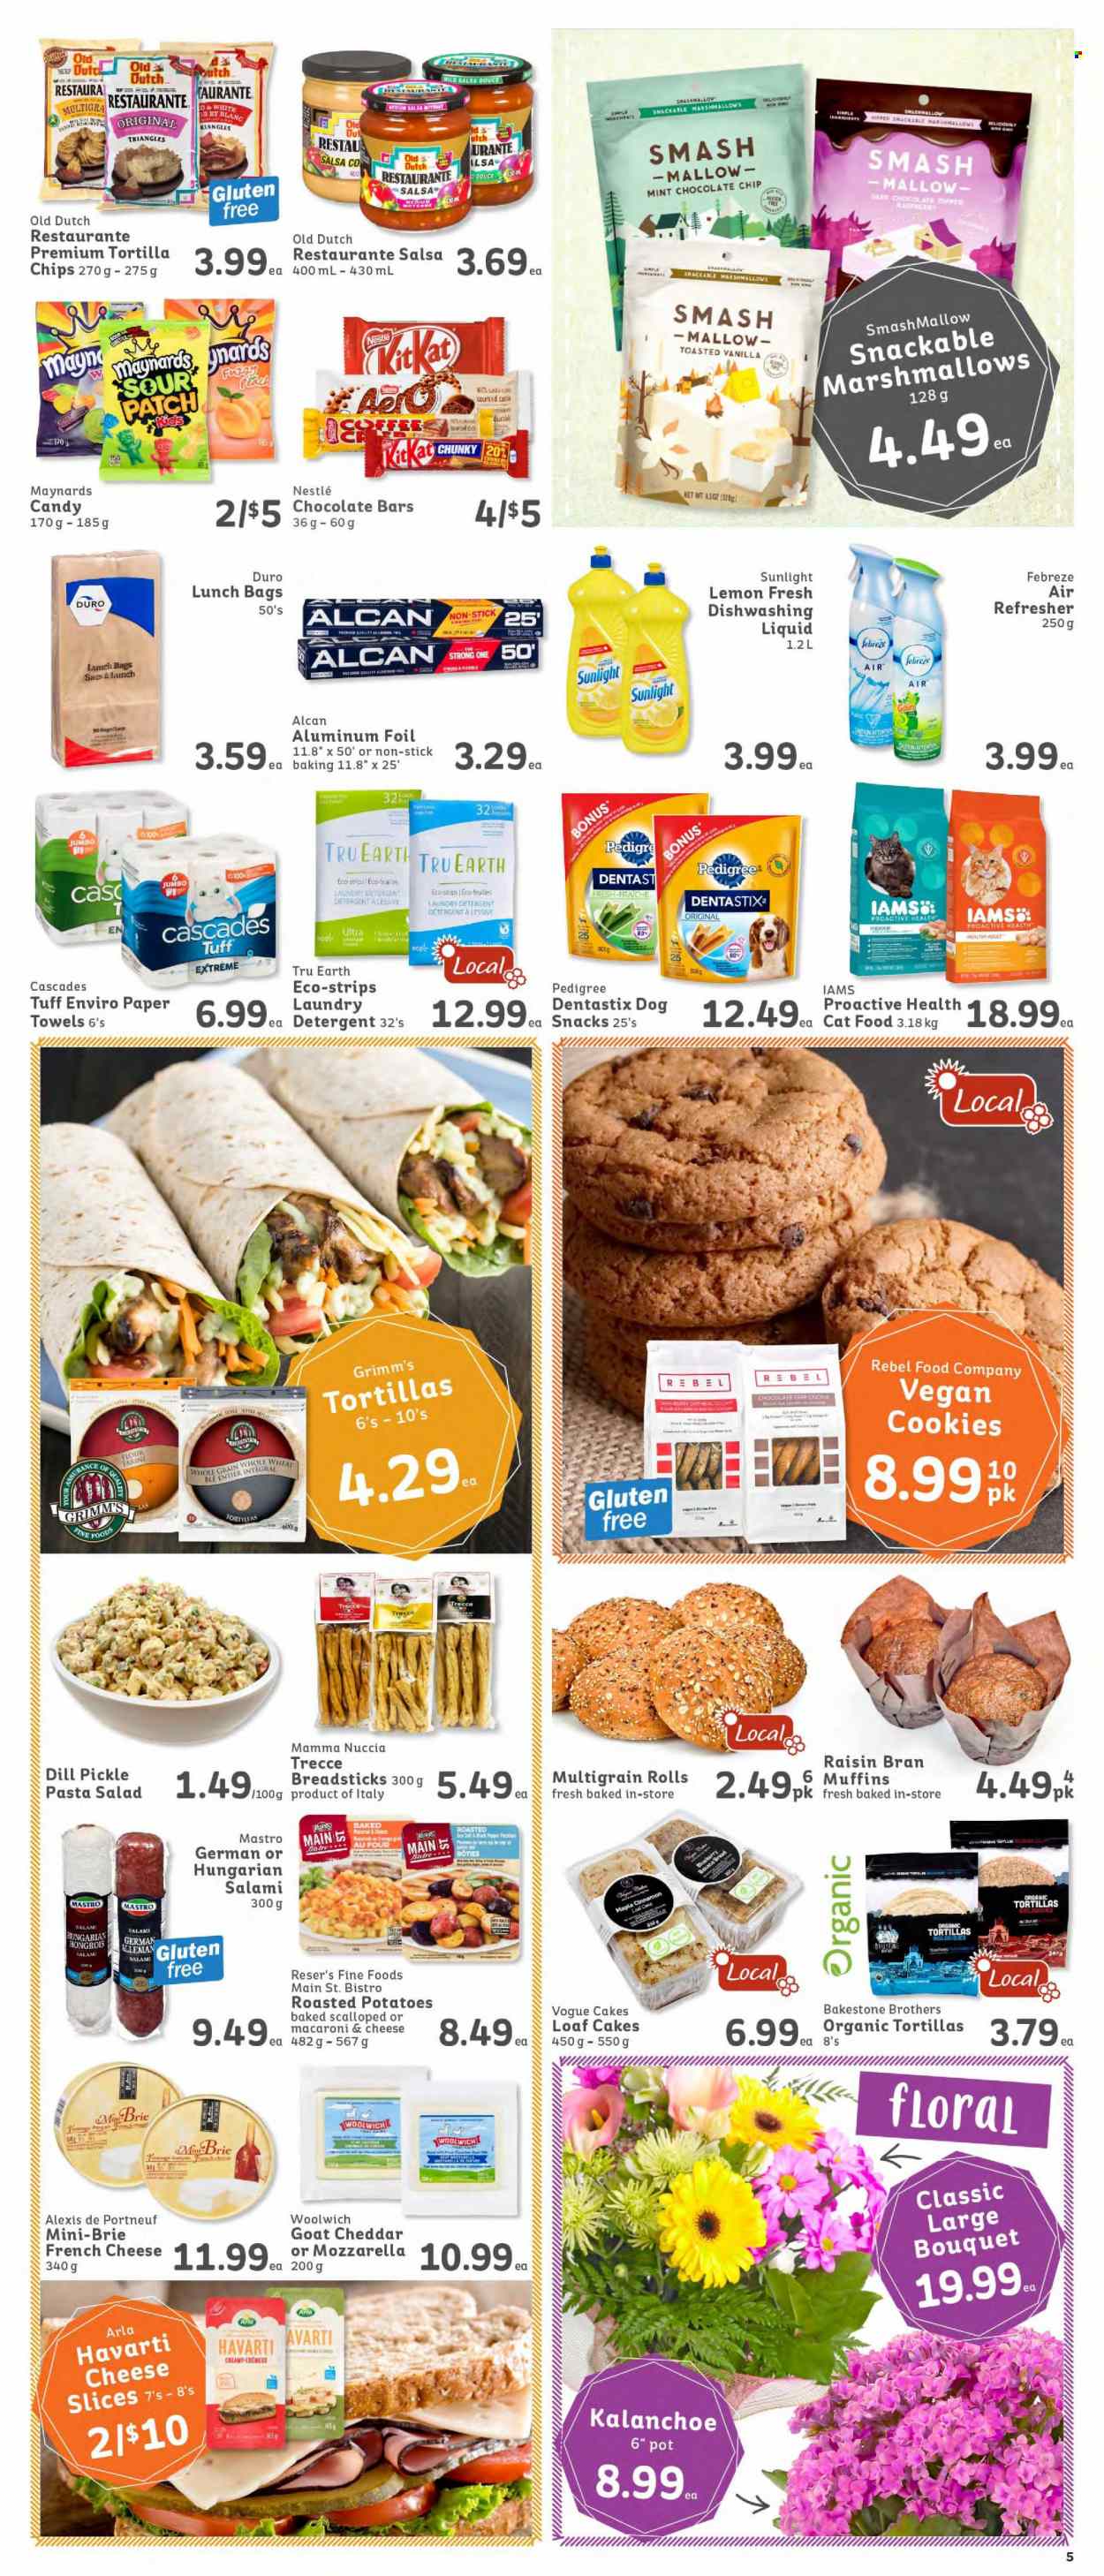 thumbnail - IGA Simple Goodness Flyer - January 07, 2022 - January 13, 2022 - Sales products - tortillas, cake, muffin, potatoes, salad, macaroni & cheese, pasta, salami, pasta salad, sliced cheese, Havarti, brie, Arla, strips, cookies, marshmallows, snack, KitKat, sour patch, chocolate bar, bread sticks, dill pickle, Raisin Bran, dill, cinnamon, salsa, BROTHERS, Nestlé, mozzarella, chips. Page 5.